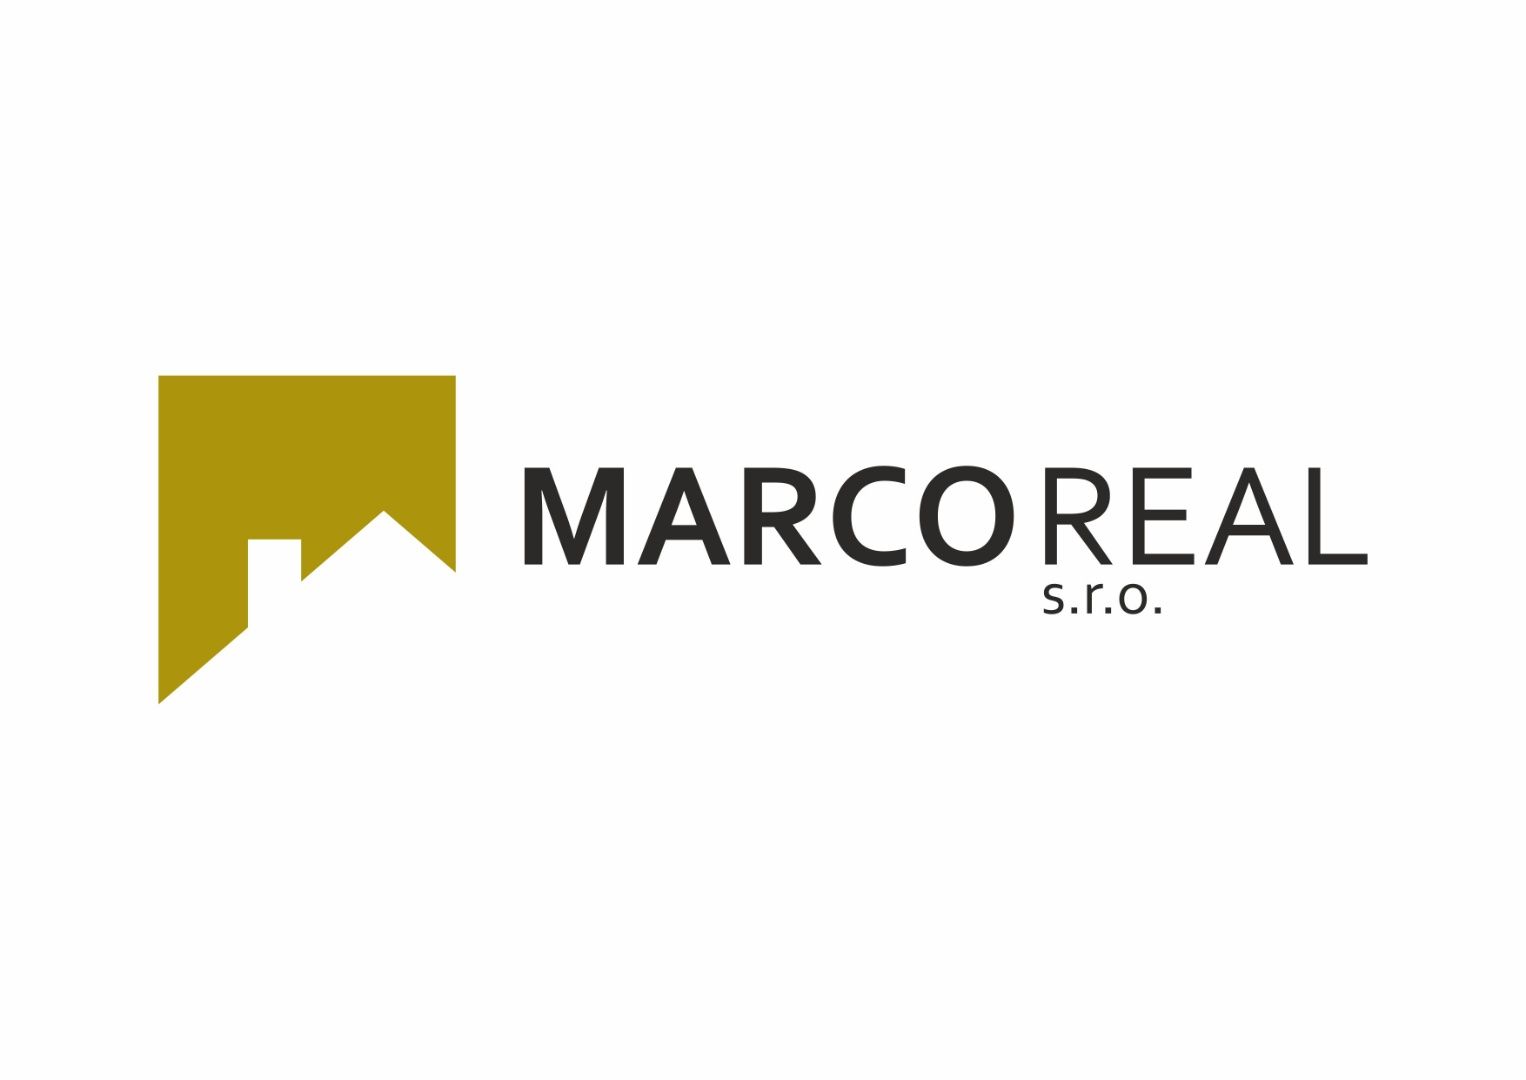 MARCO REAL, s.r.o.